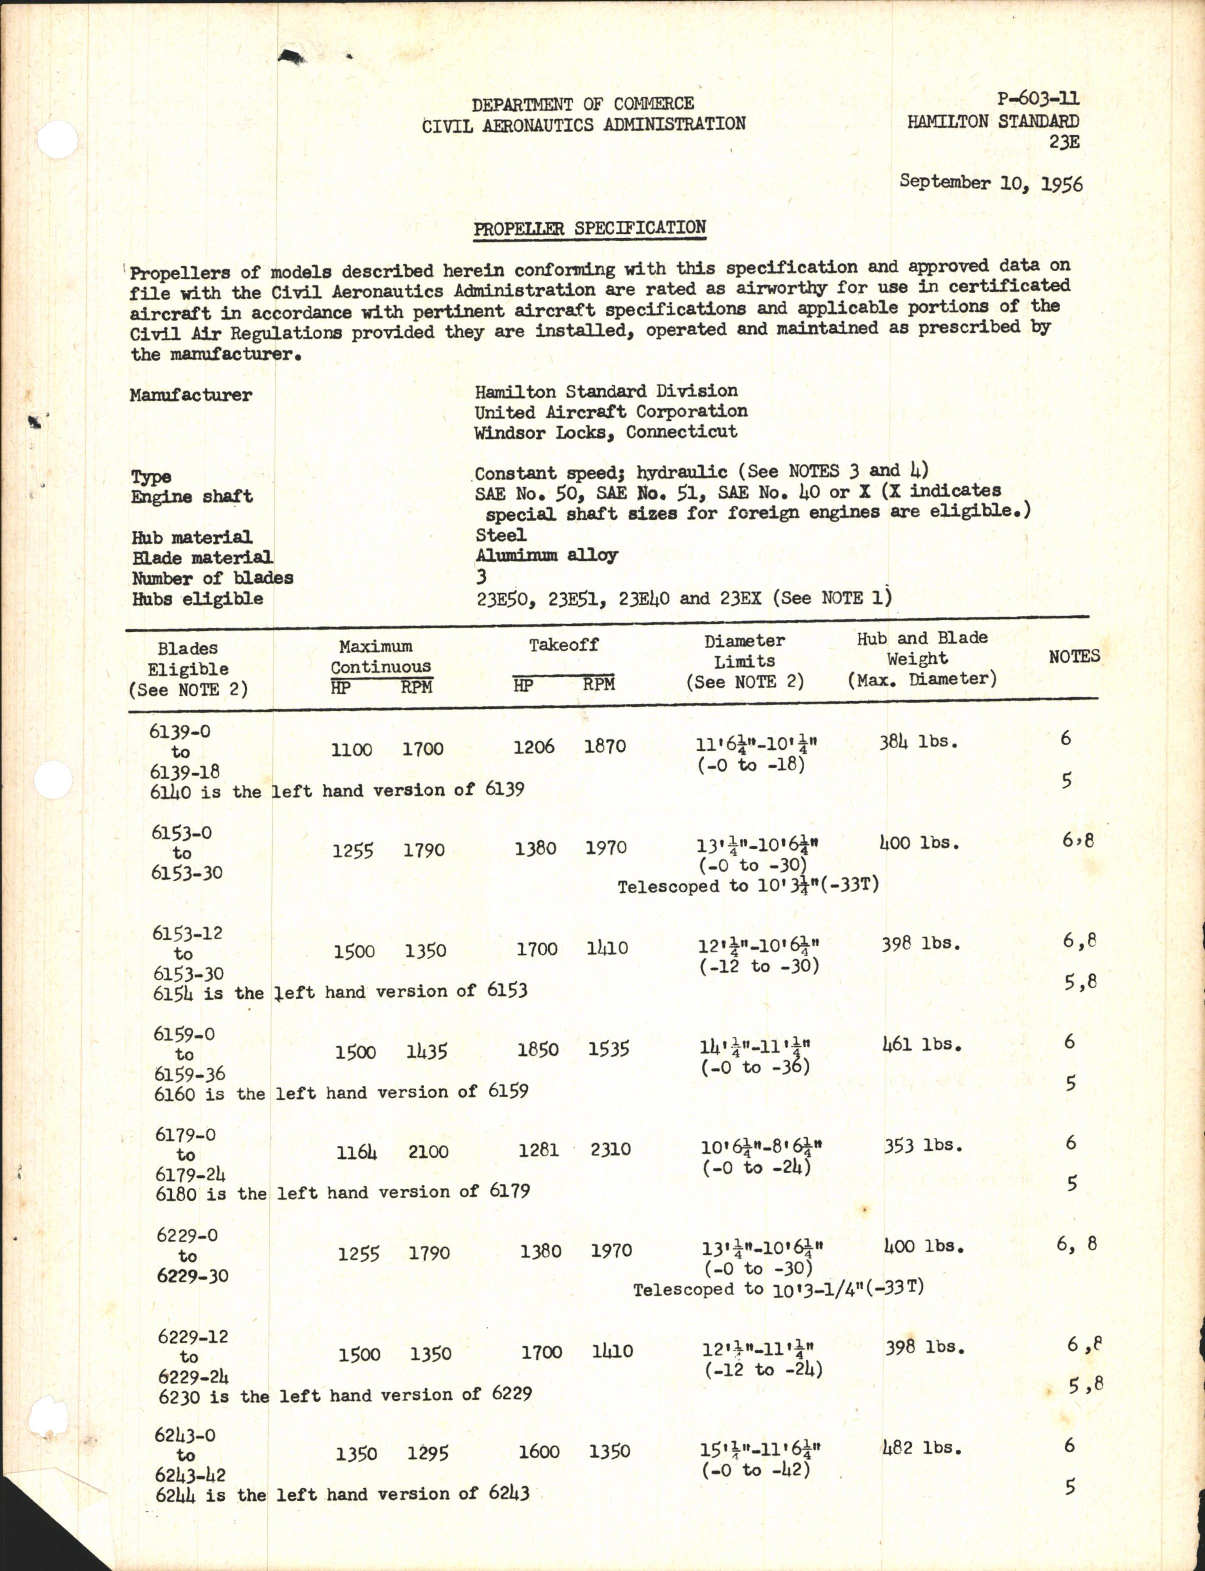 Sample page 1 from AirCorps Library document: Propeller Specification for 23E Propeller